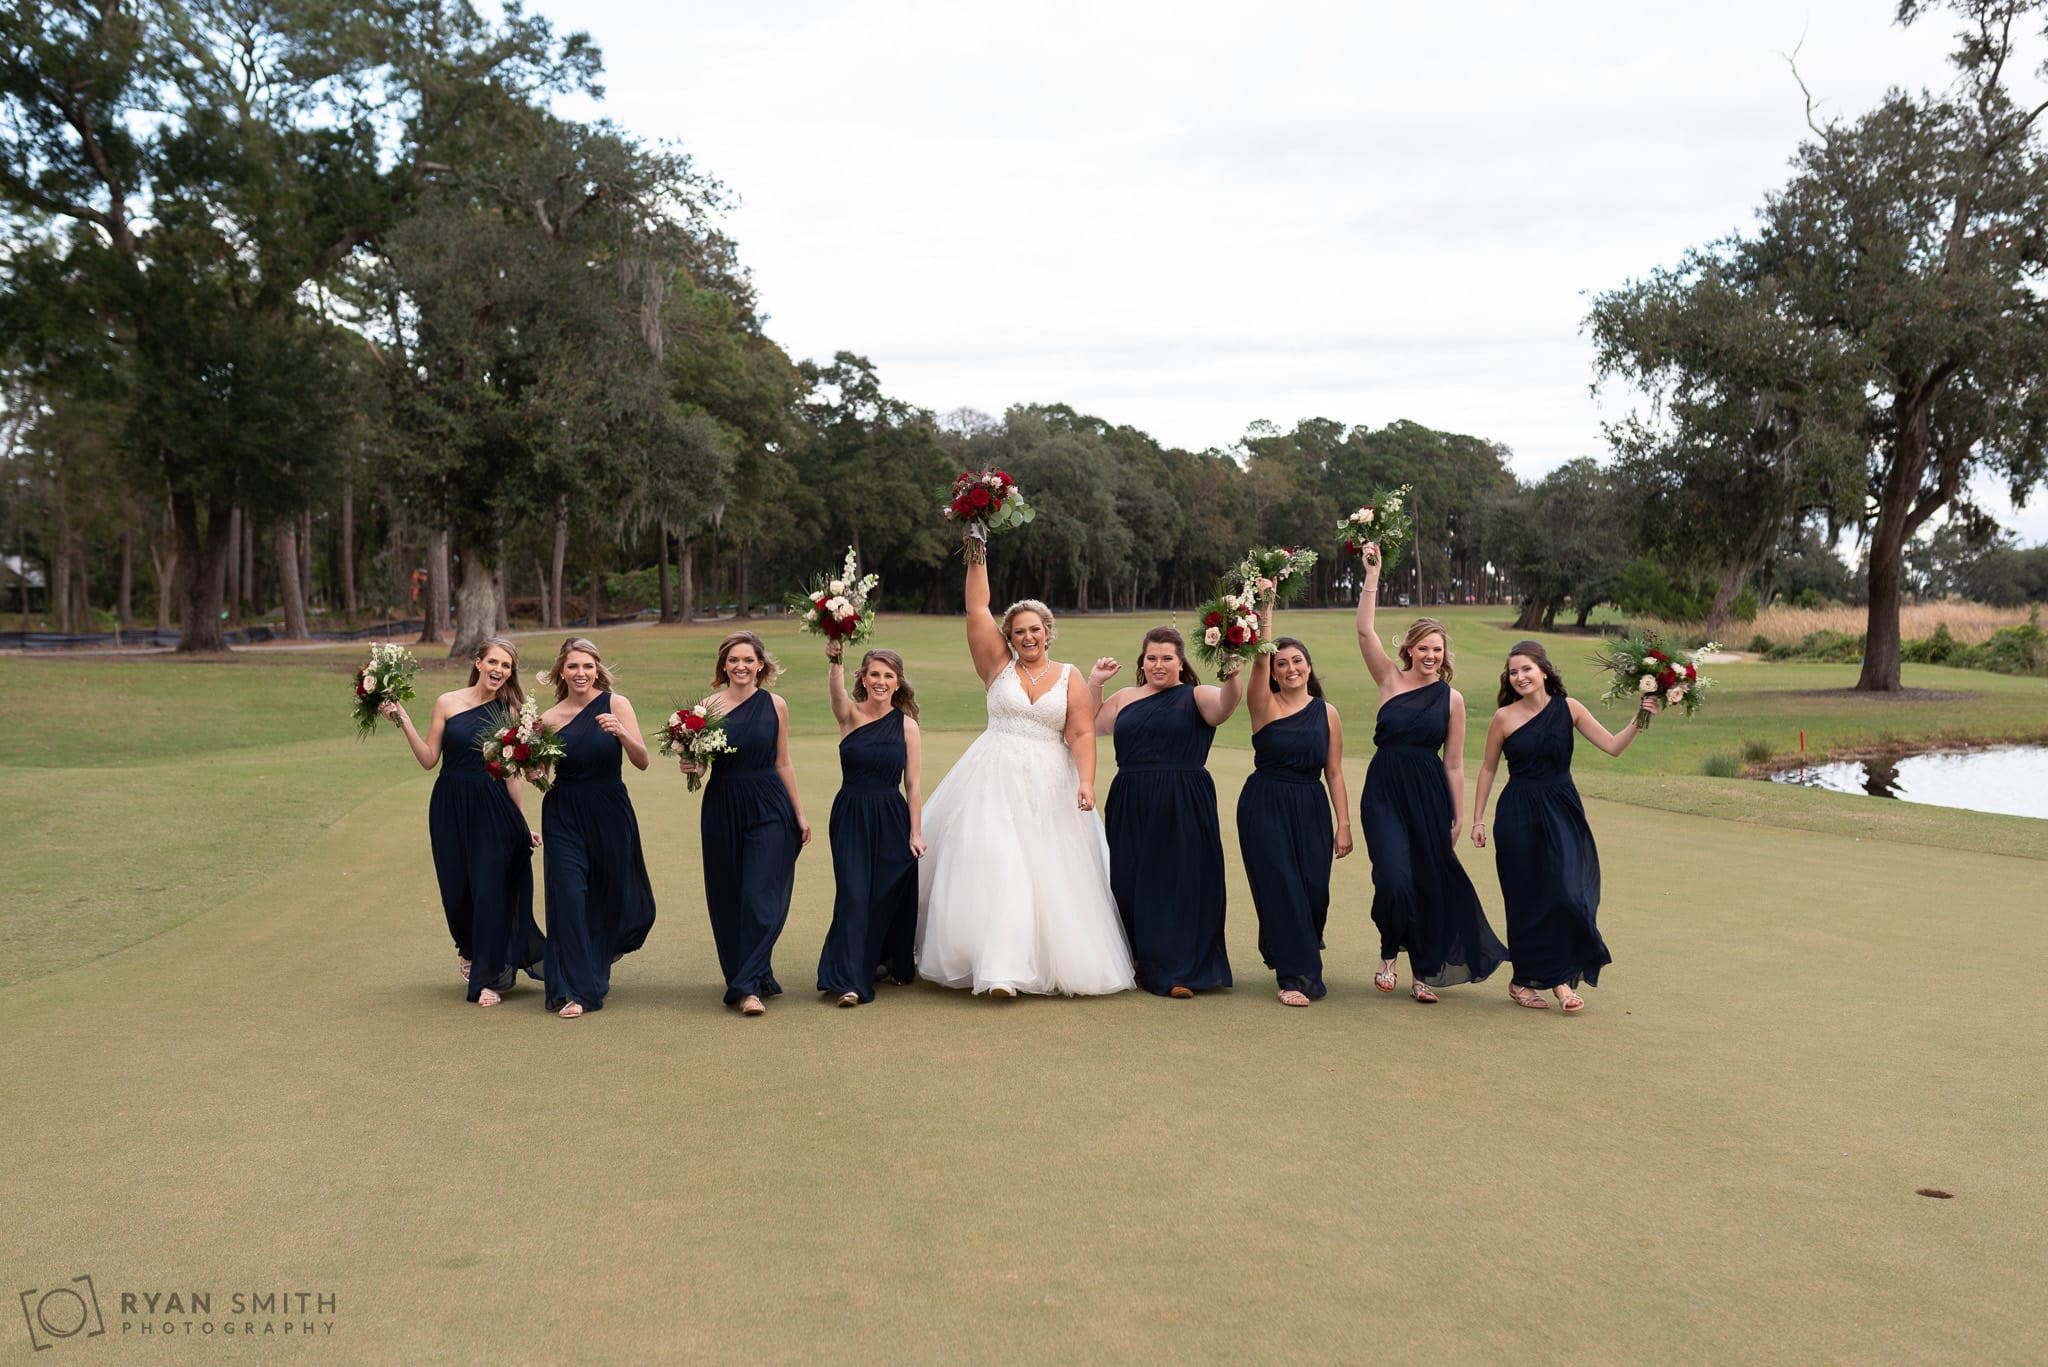 Bridesmaids walking down the green holding flowers in the air